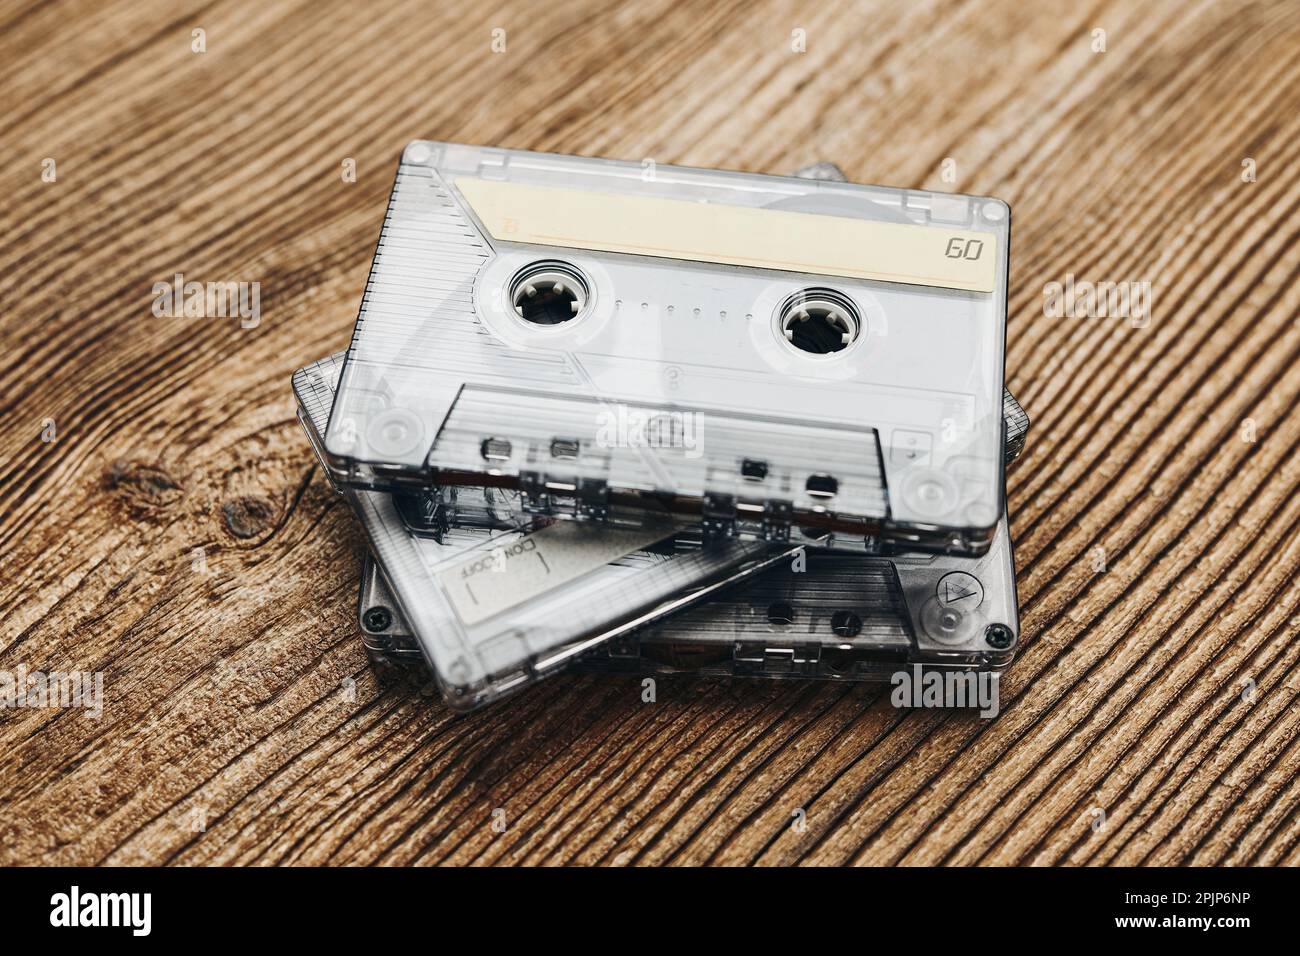 Tape cassettes. Magnetic cassette tapes on wooden table. Retro music style. 80s music party. Vintage style. Analog equipment. Stereo sound Stock Photo